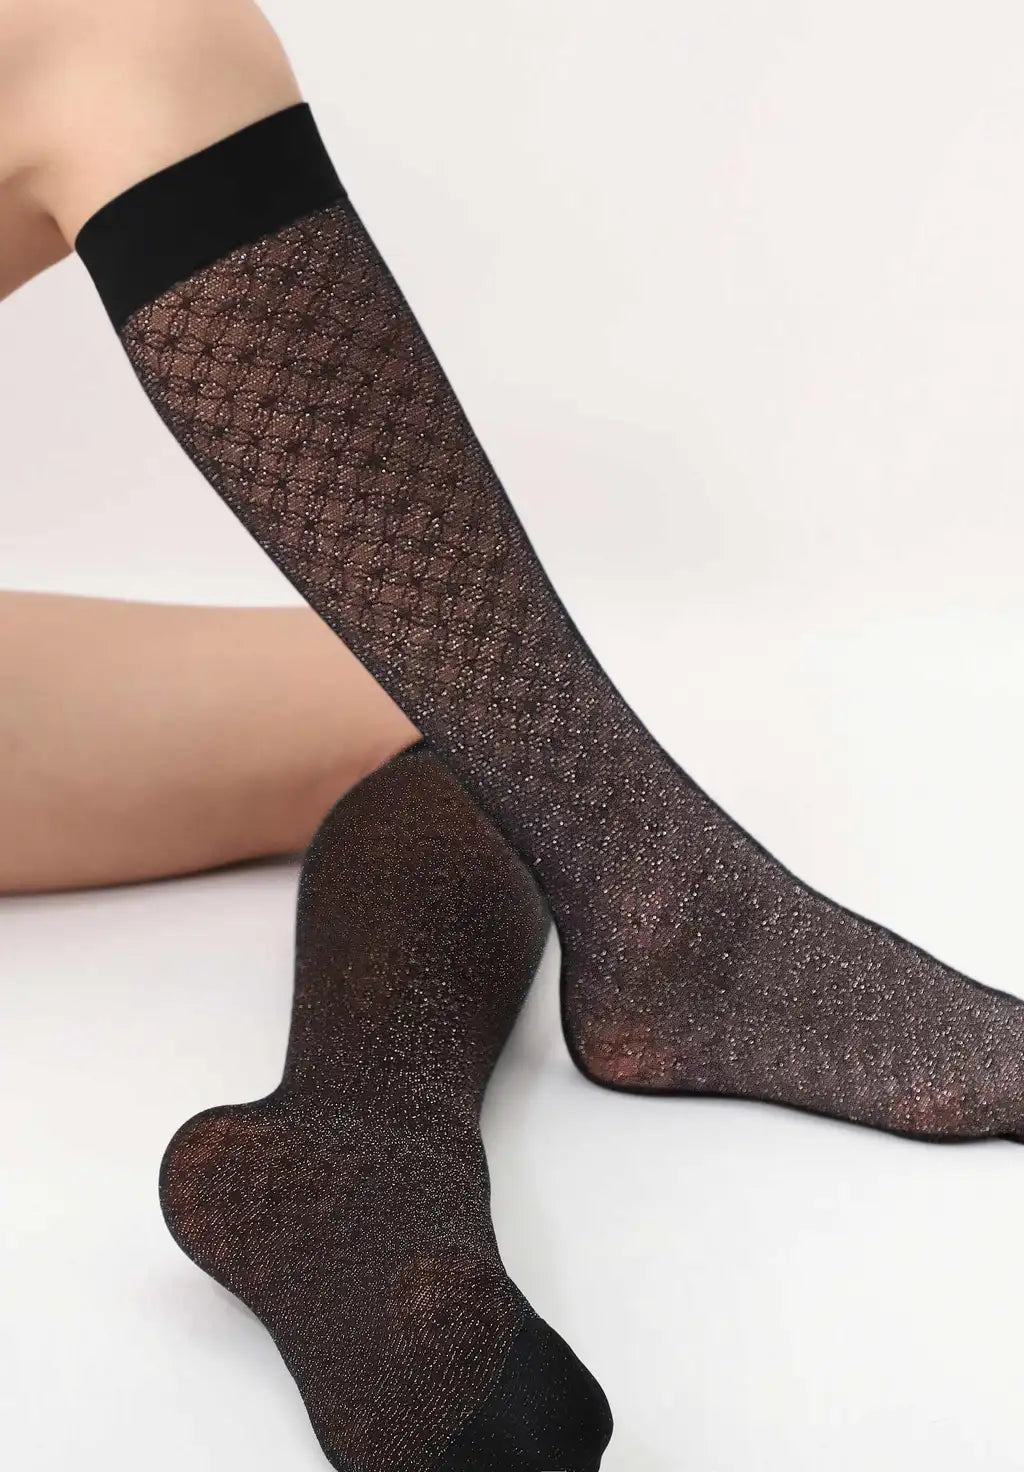 Oroblù Sparkly Lace Knee Socks - Semi sheer fashion tights with an all over delicate geometric lace style pattern in silver lurex, plain reinforced toe and plain comfort cuff.